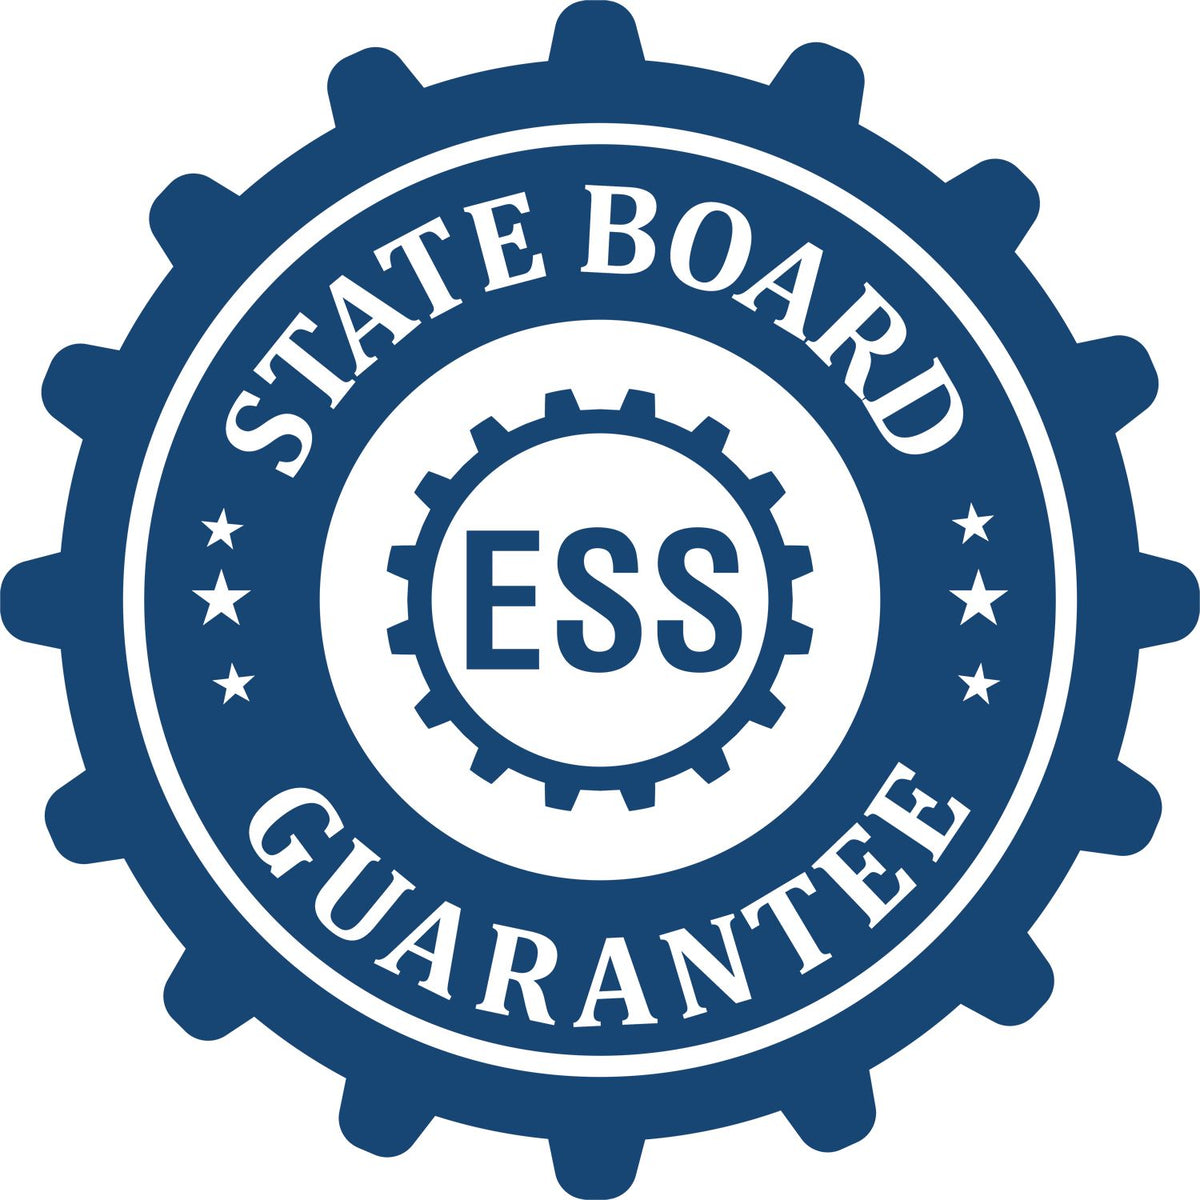 An emblem in a gear shape illustrating a state board guarantee for the Soft California Professional Engineer Seal product.